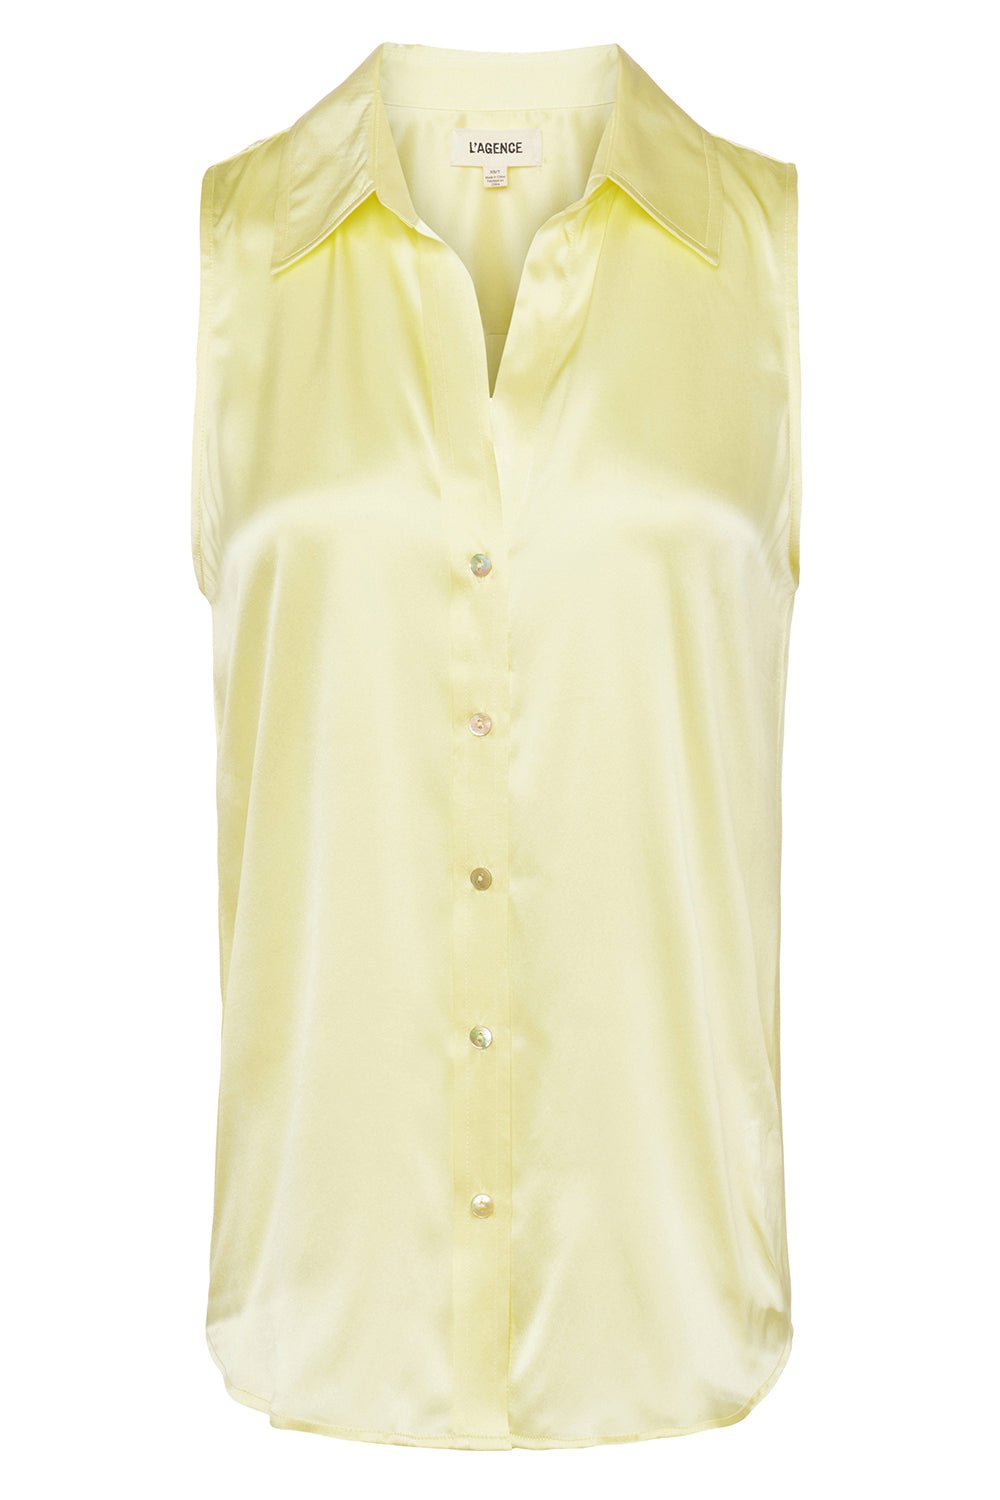 L'AGENCE-Emmy Blouse - Yellow Sorbet-